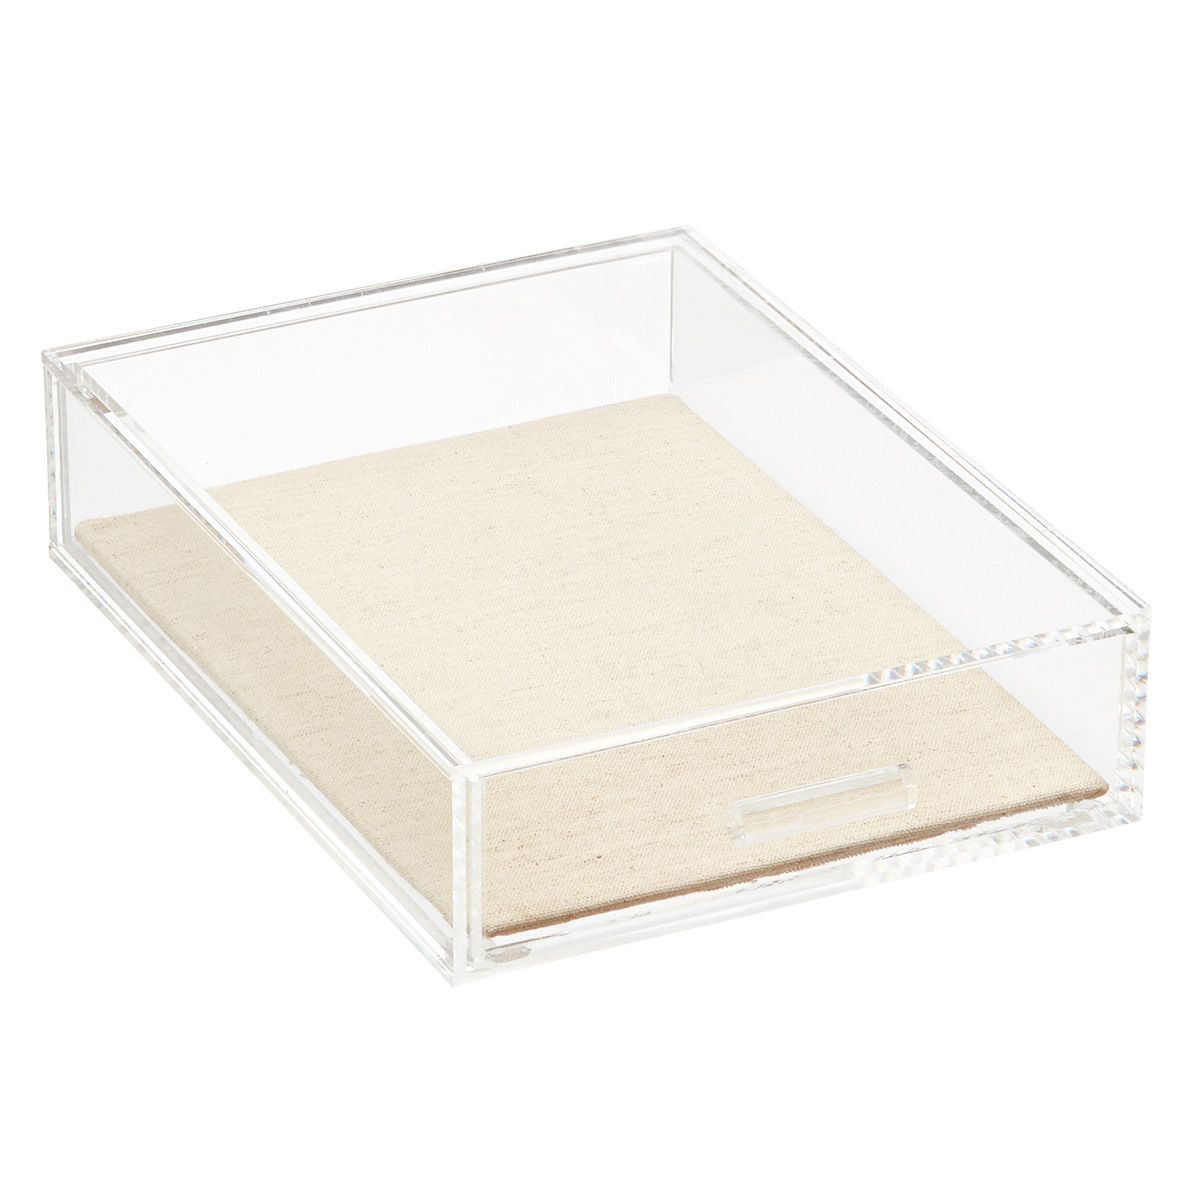 Modular Acrylic Linen Jewelry Drawer System | The Container Store